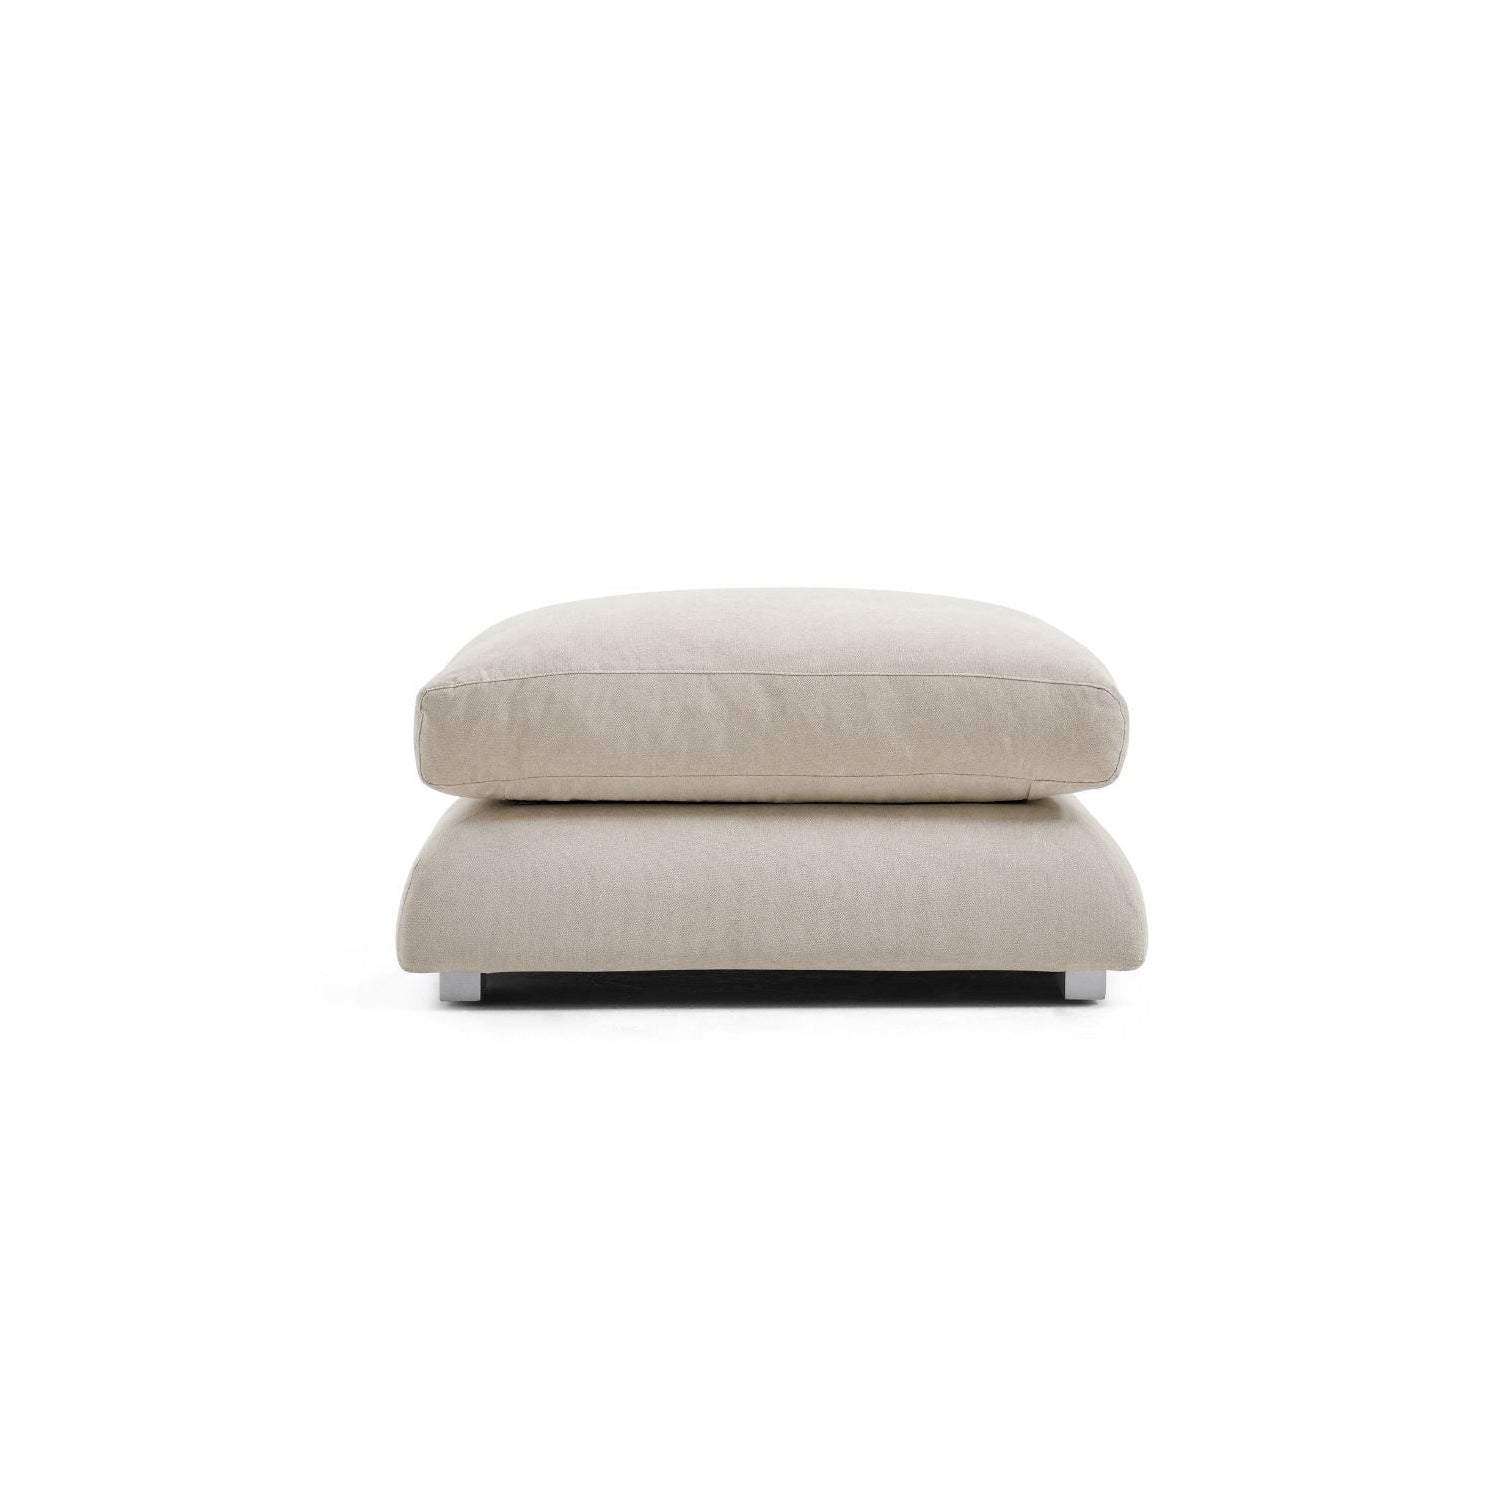 Feathers Ottoman - Valyou 